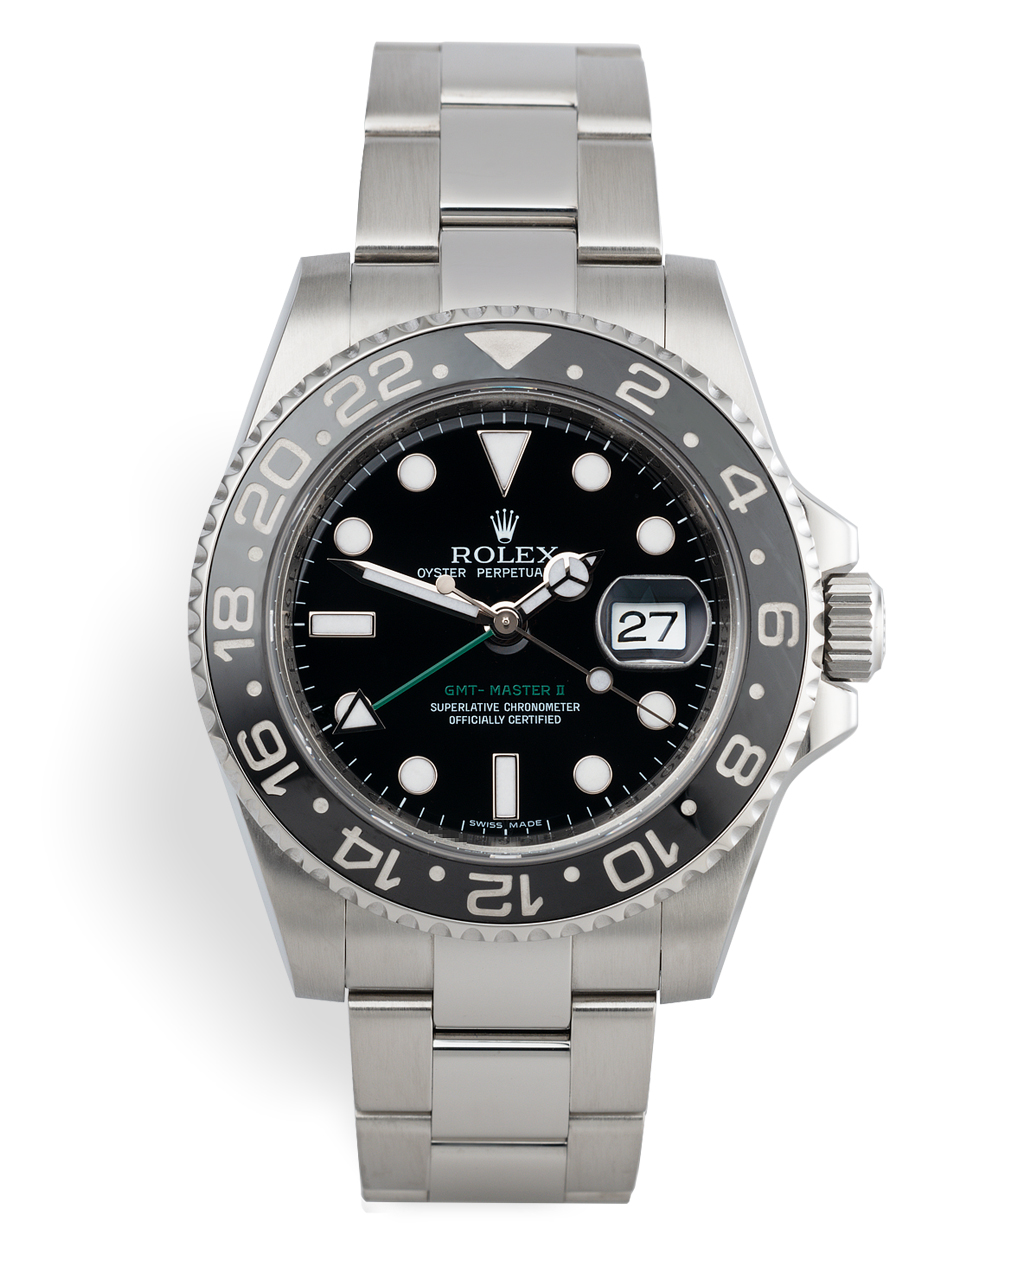 Rolex GMT-Master II Watches | ref 116710LN | 'Ful Set' Discontinued ...